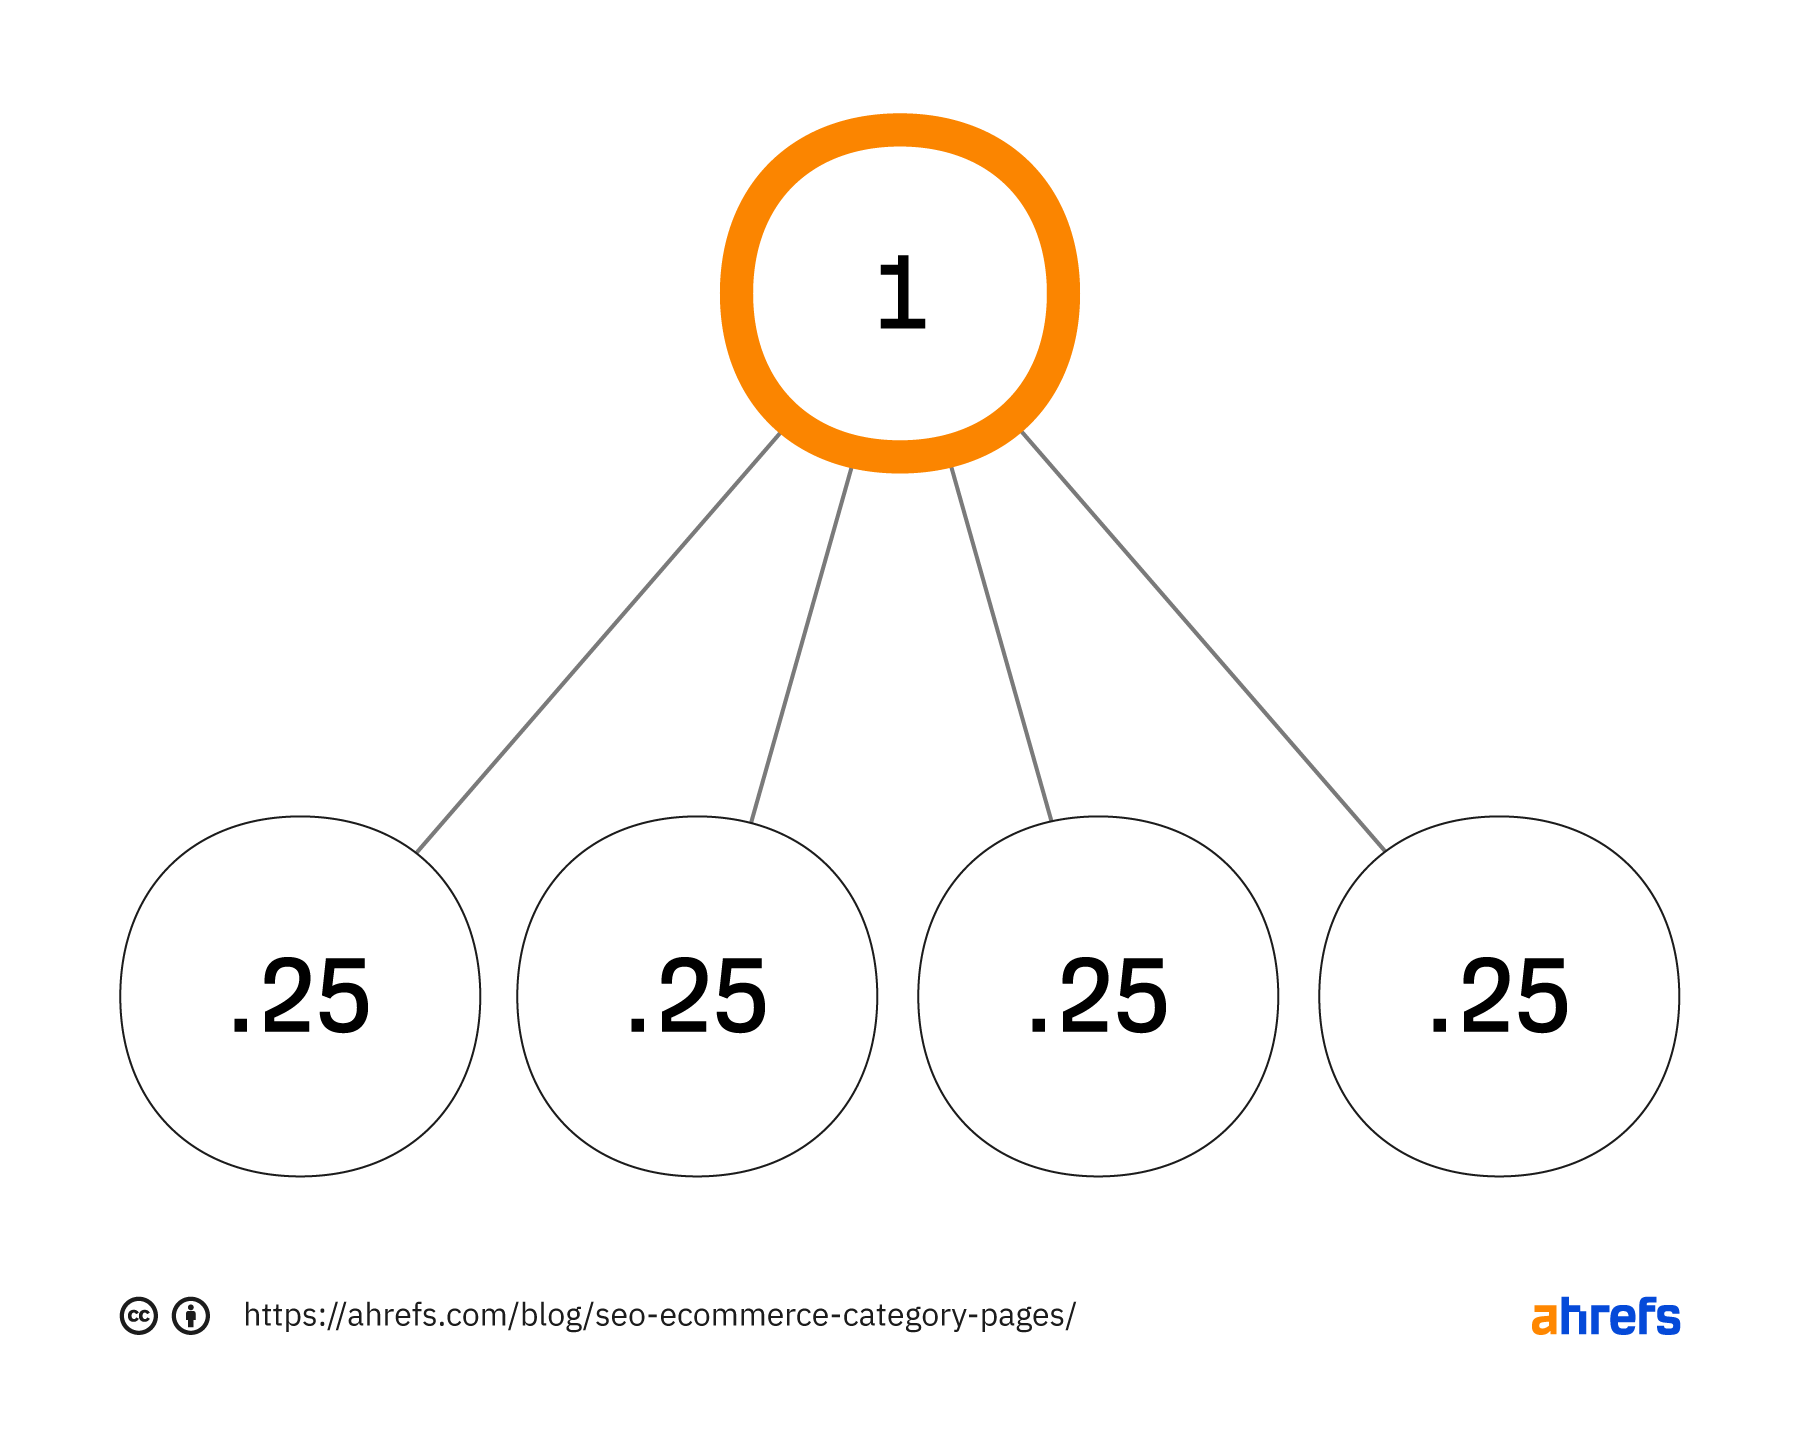 PageRank of one distributed to four pages